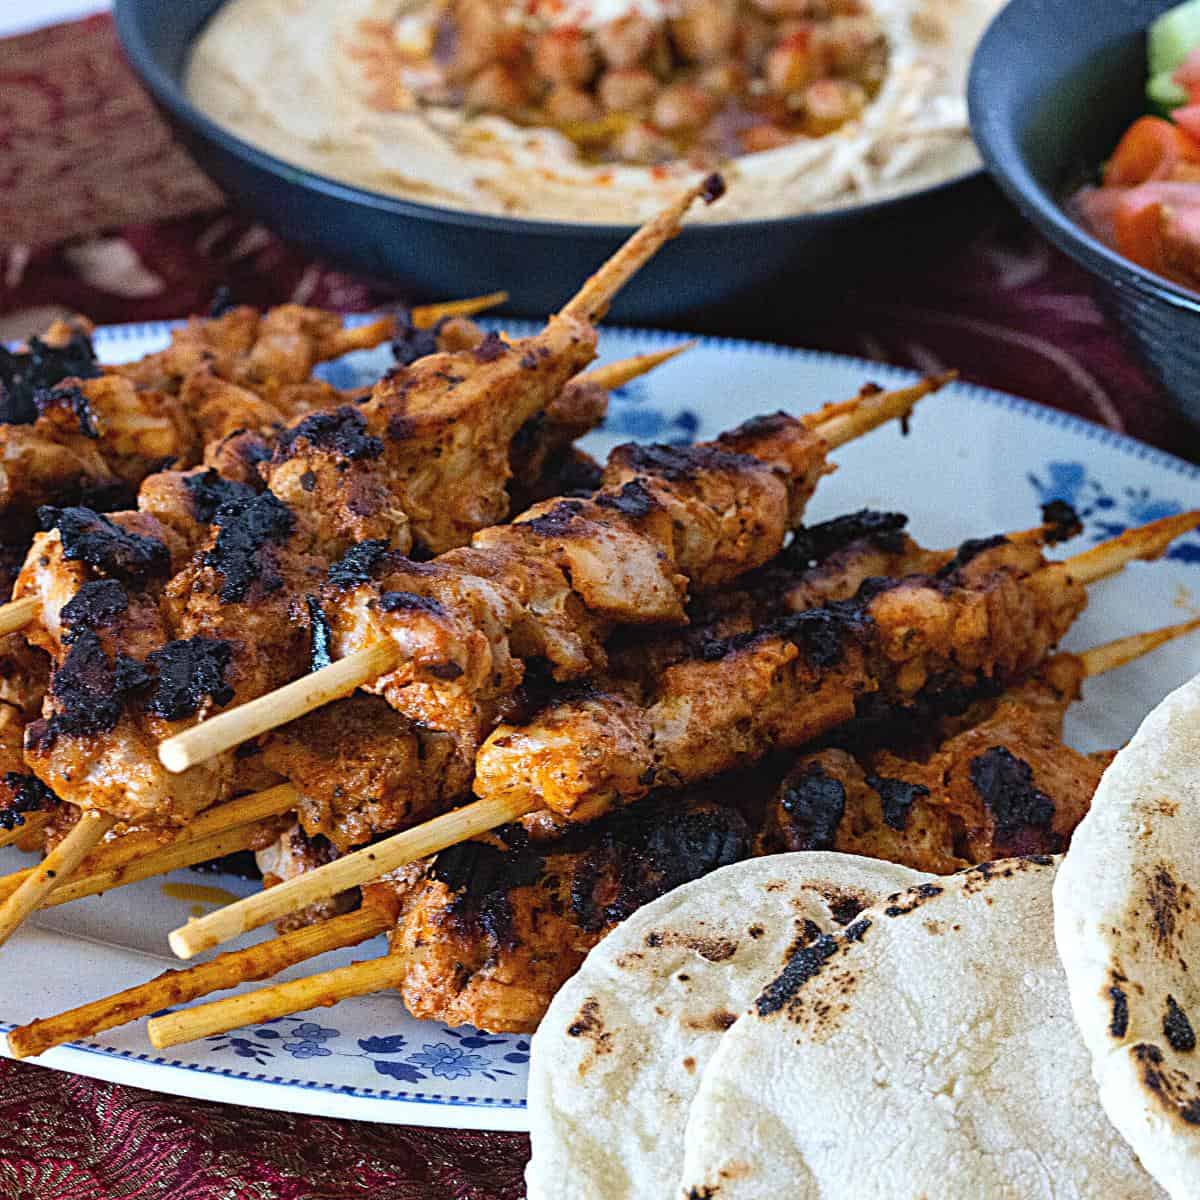 Skewers with hummus and salad.